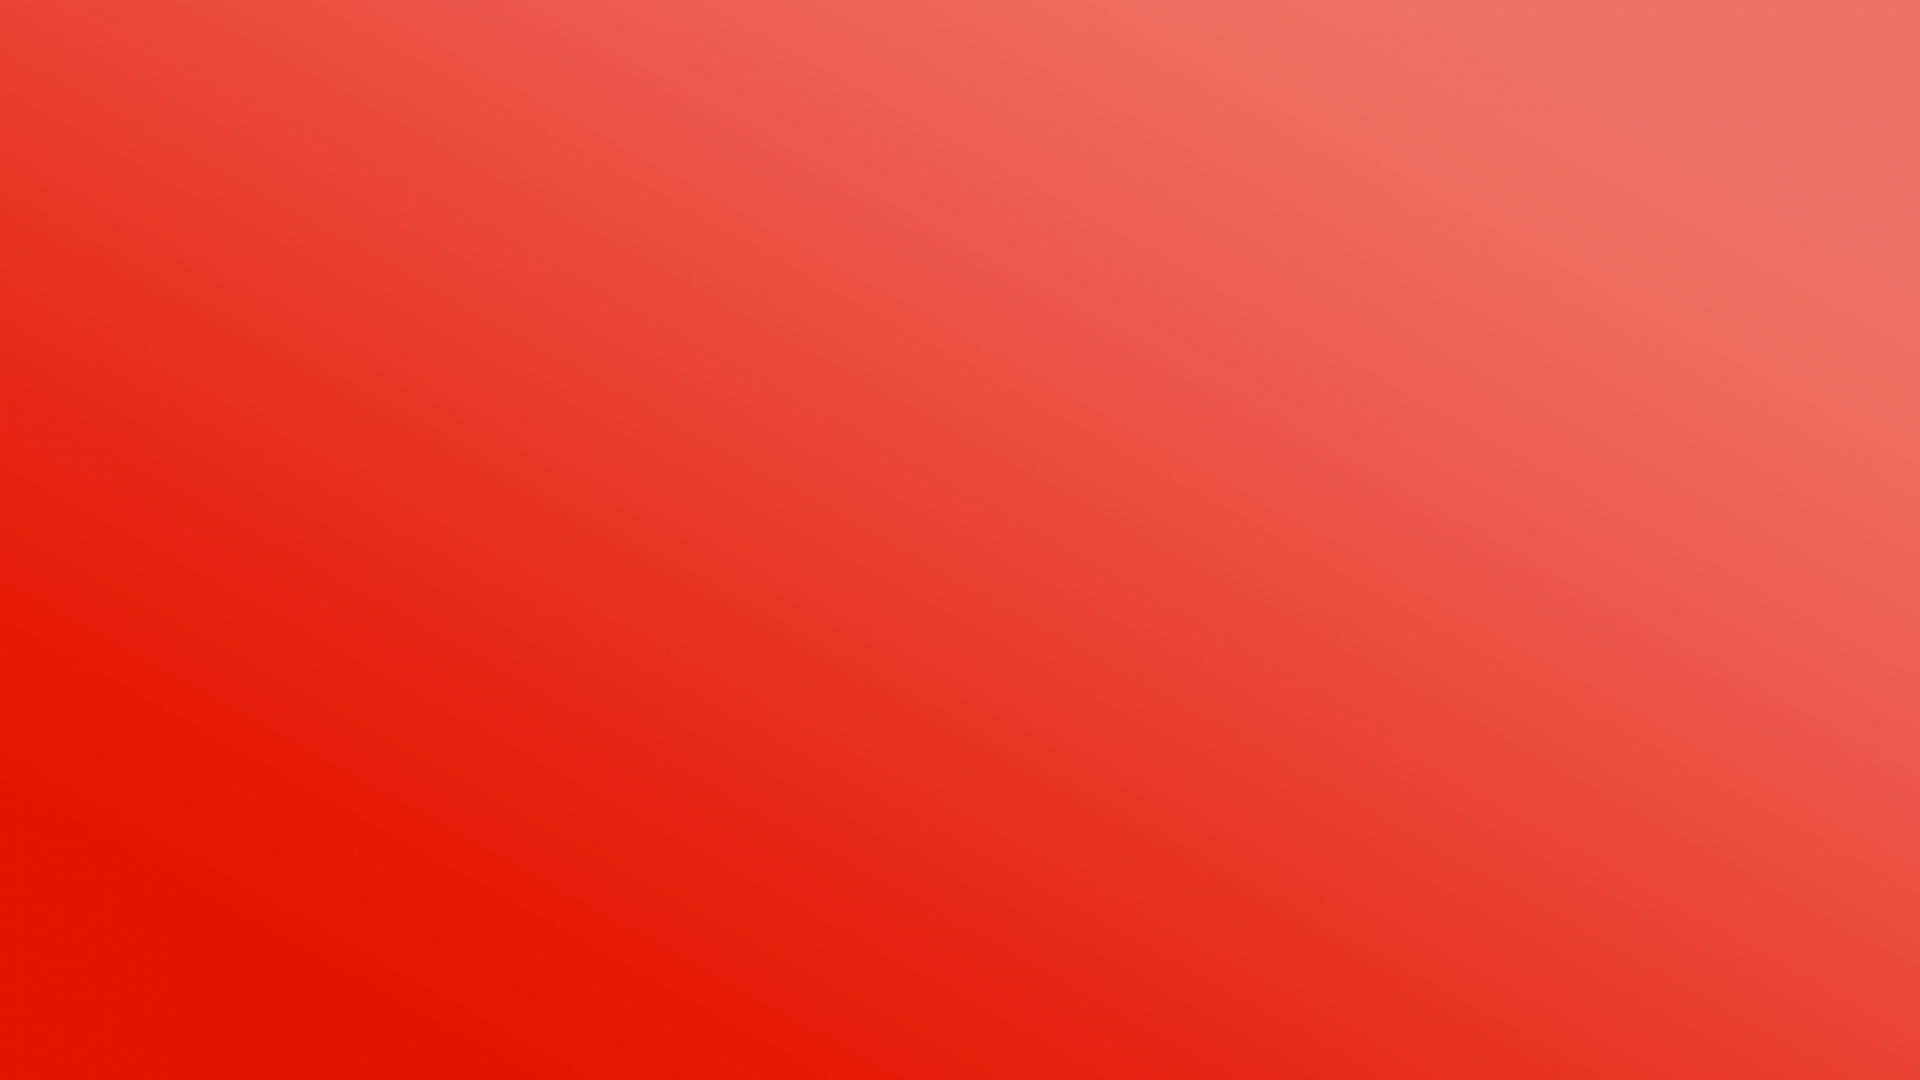 Gmail Red Gradient